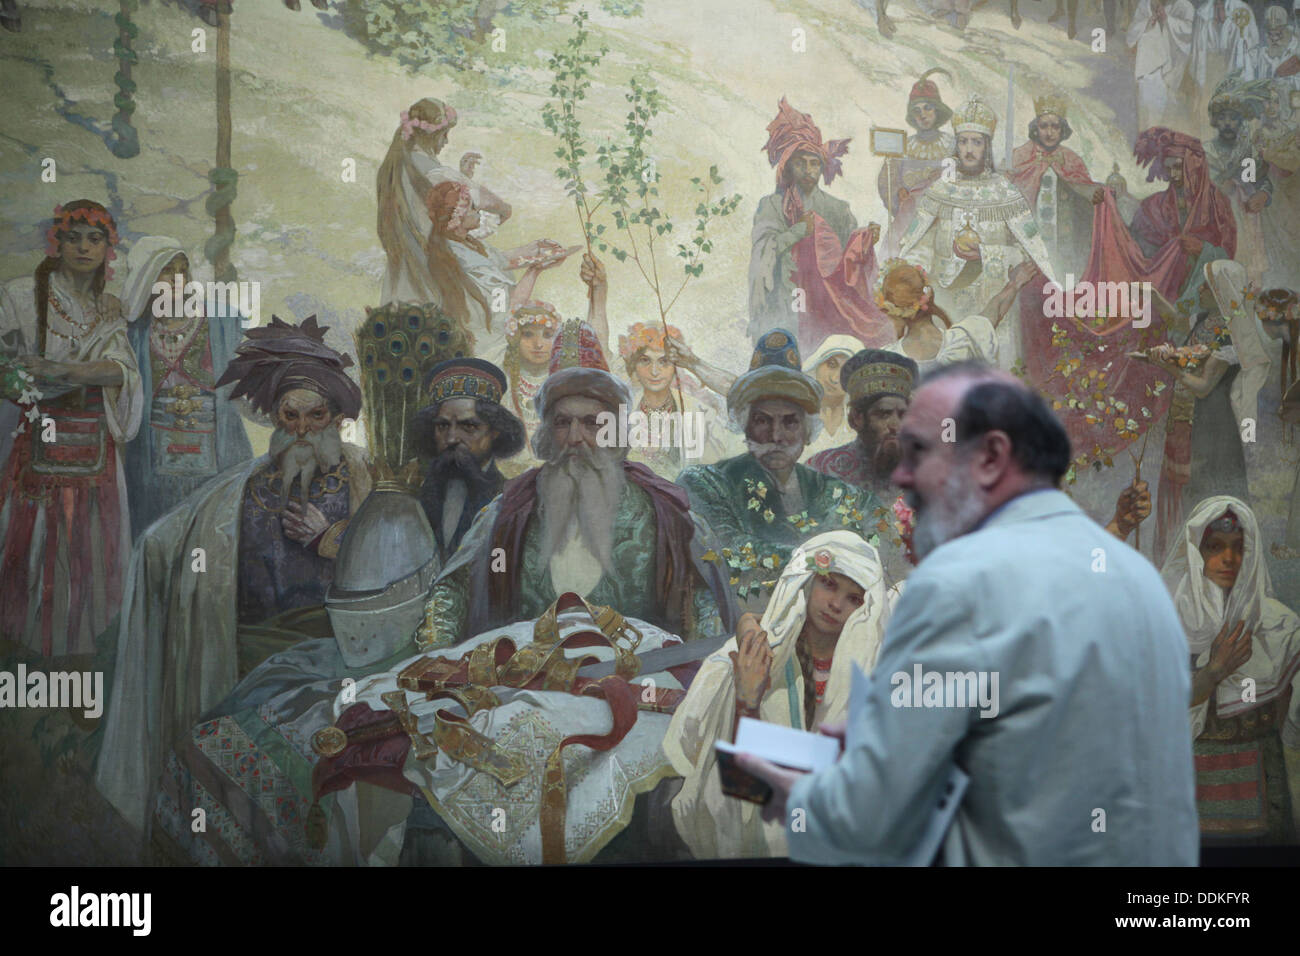 Painting 'The Coronation of Serbian Tsar Stefan Dusan' from the cycle 'The Slav Epic' painted by Alfons Mucha. Stock Photo